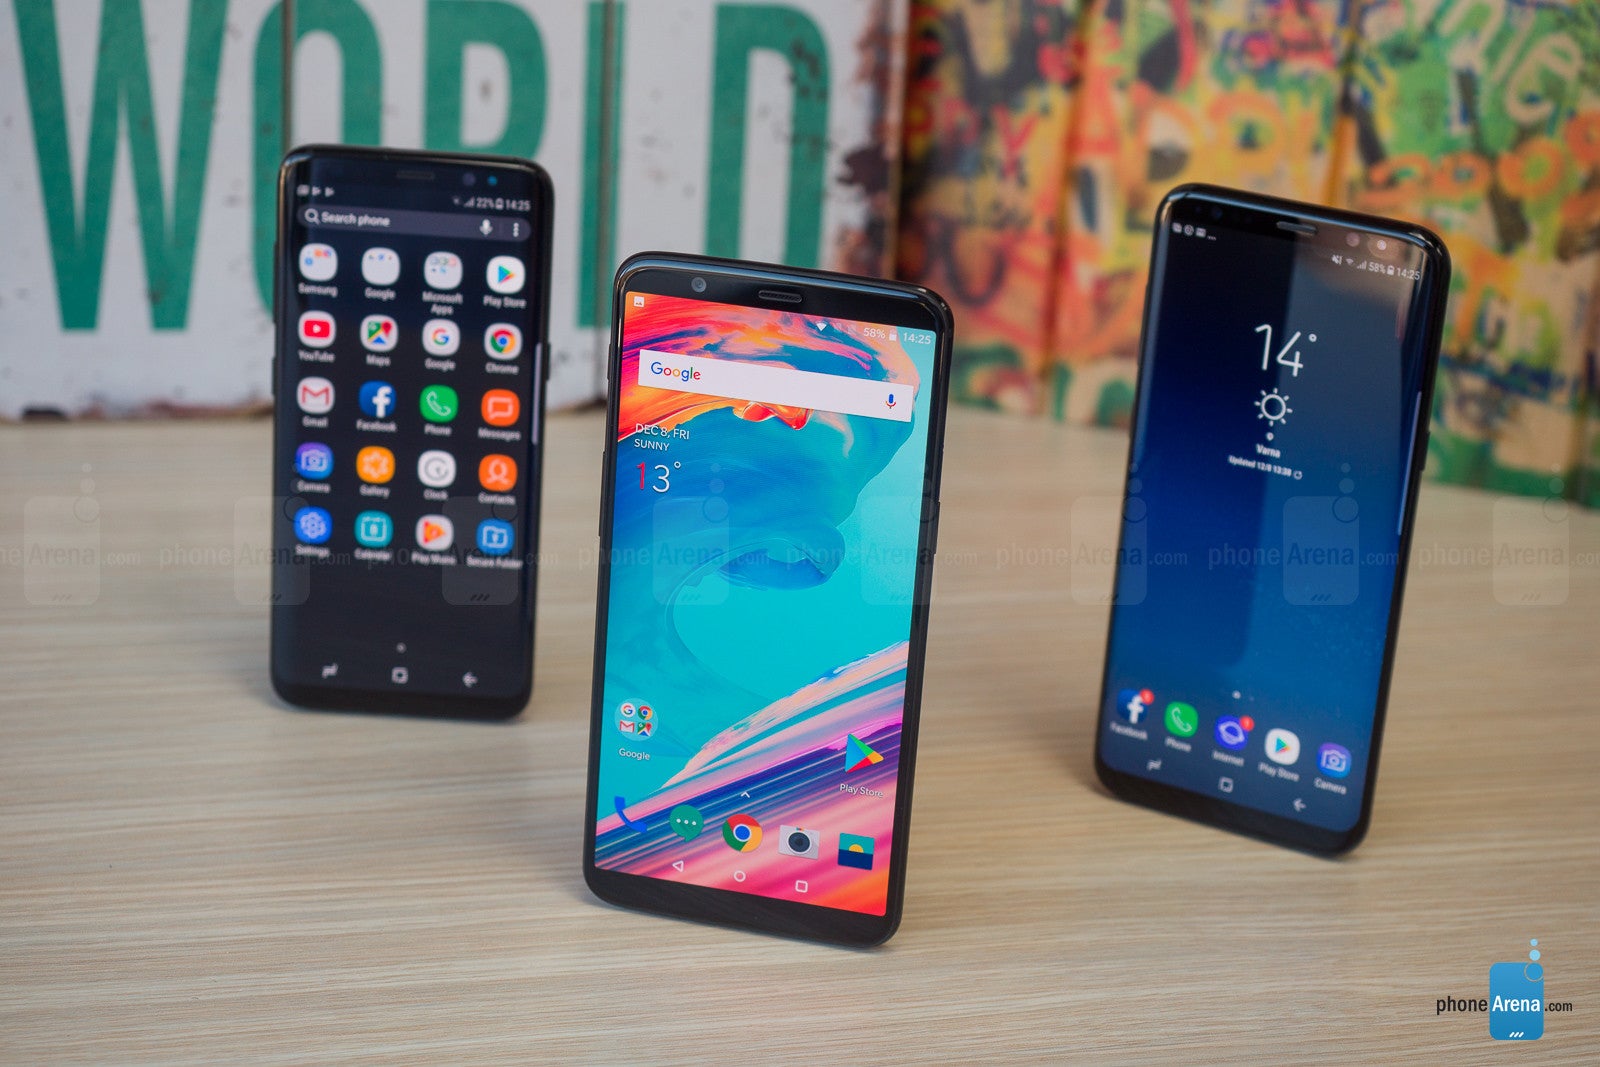 OnePlus 5T vs Samsung Galaxy S8 and Galaxy S8+